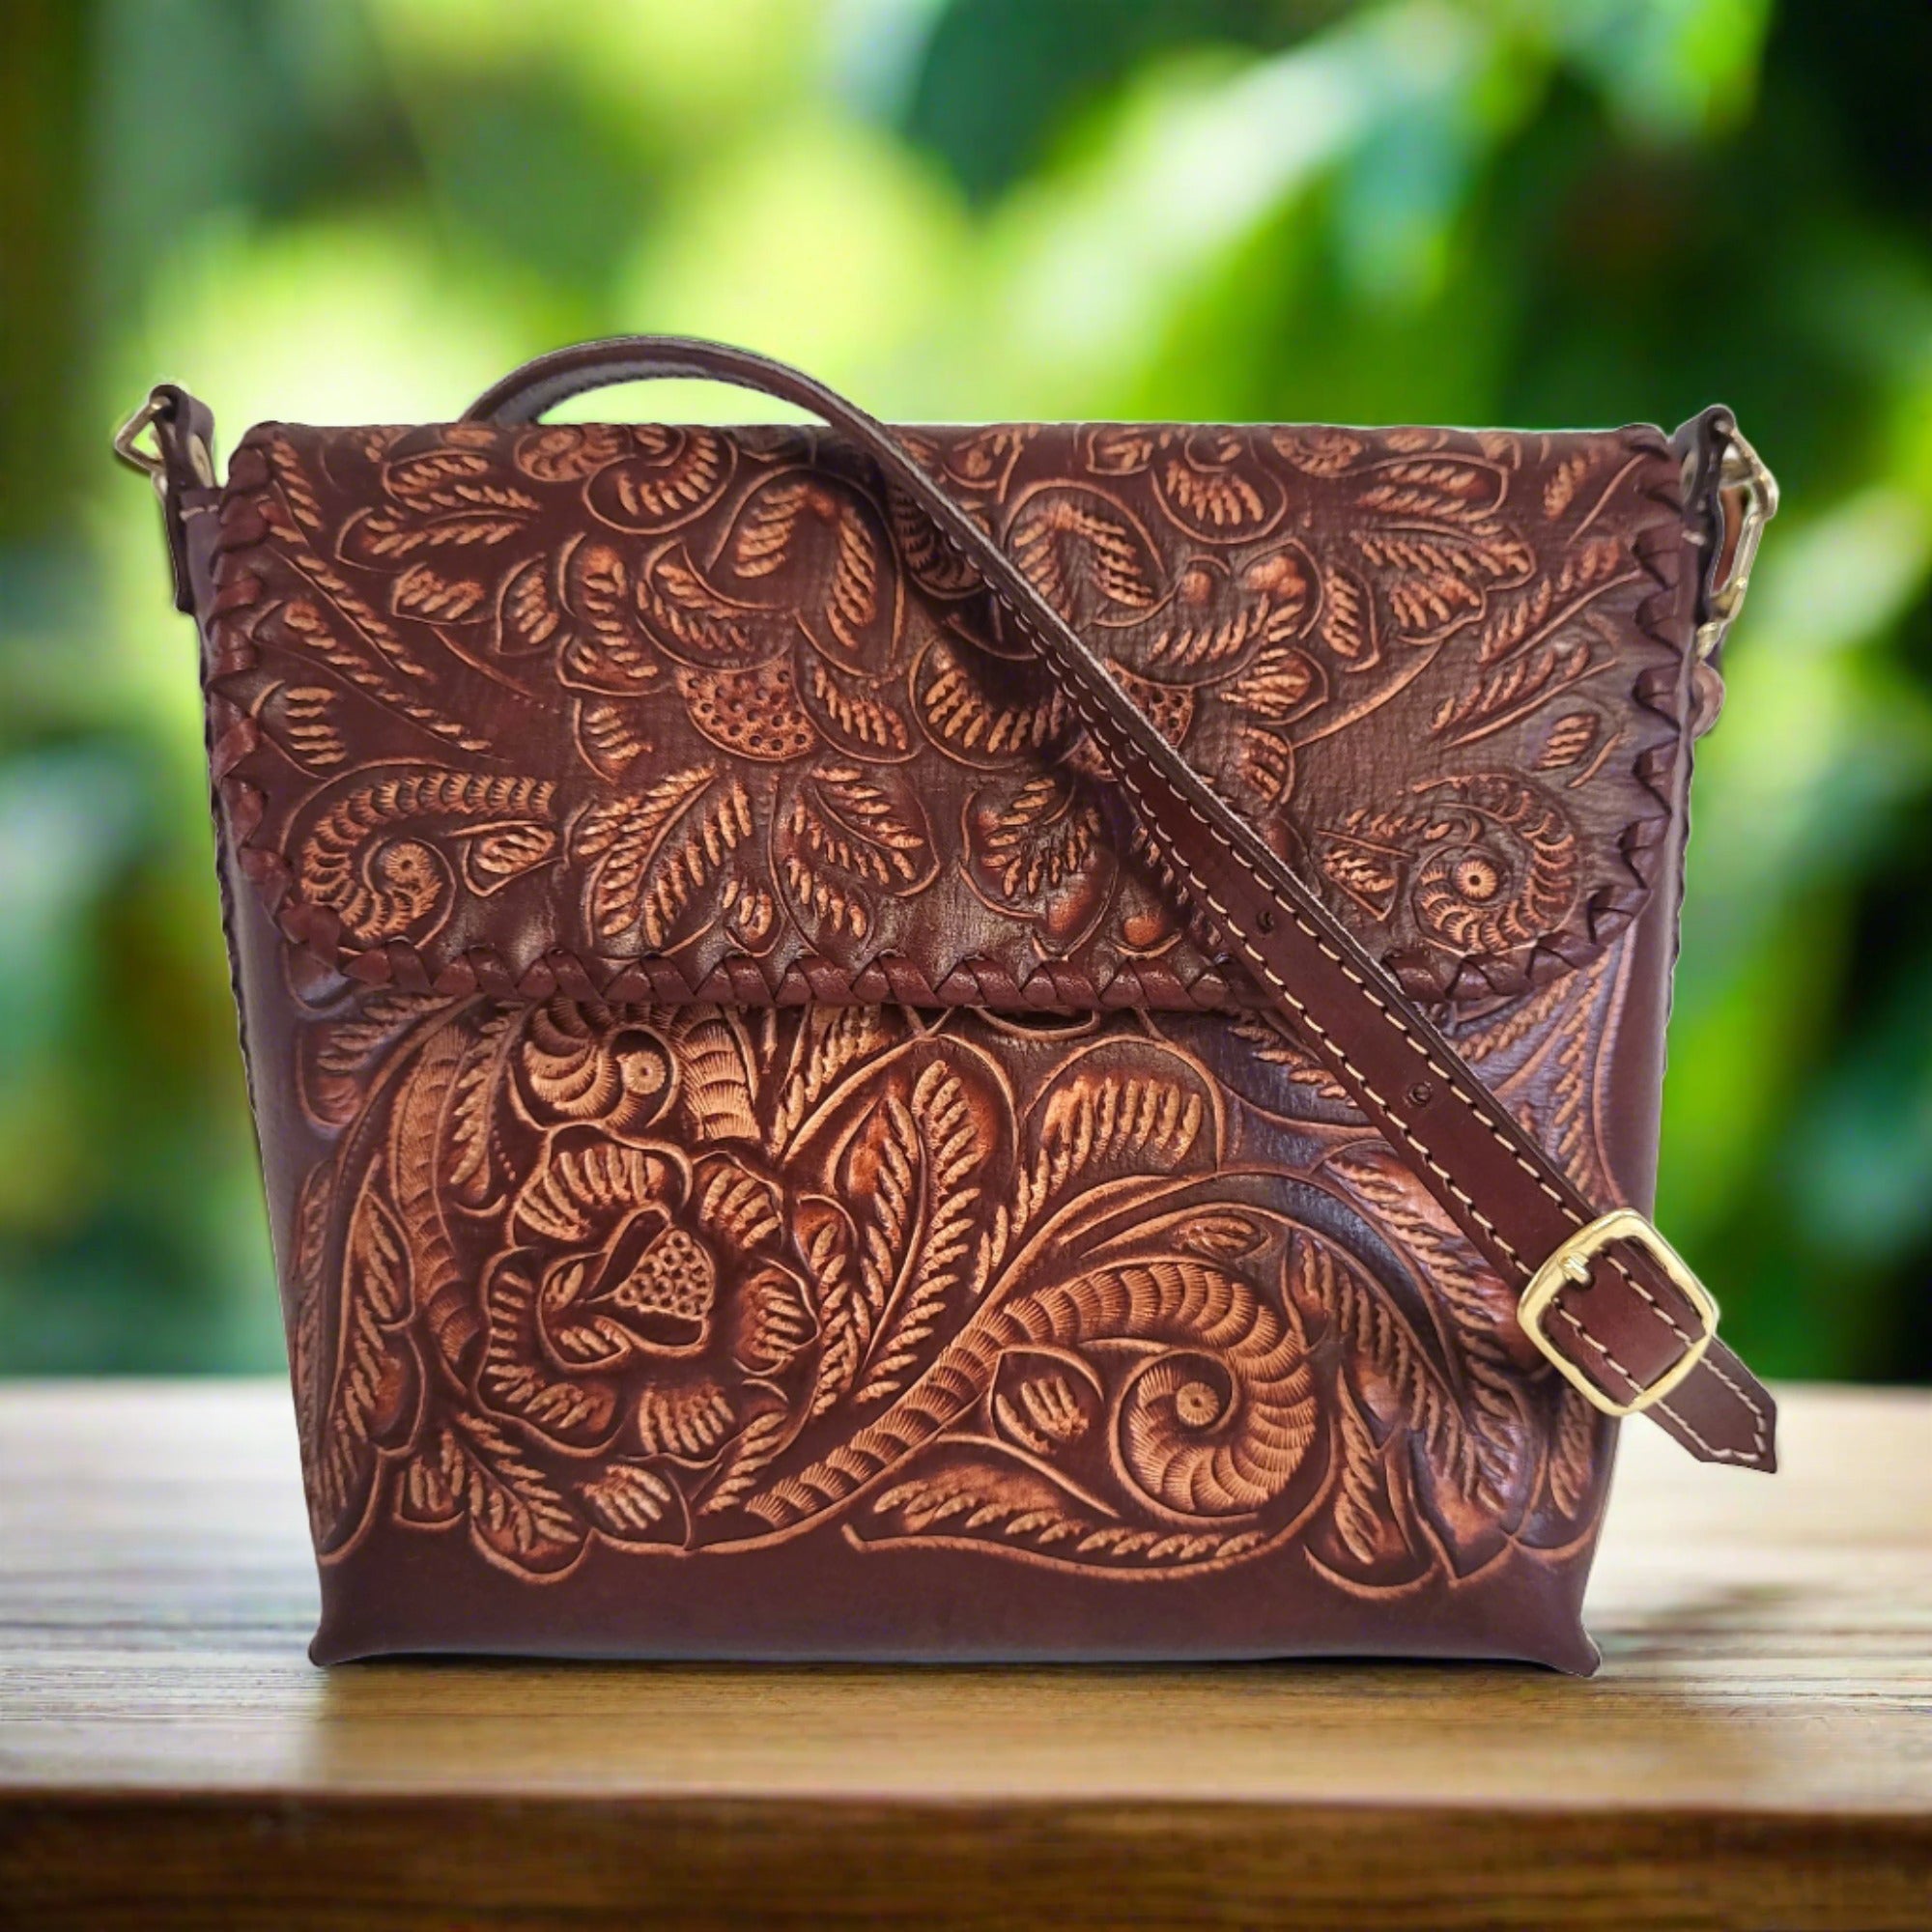 Hand tooled leather bag for women. small bag handmade with genuine leather, brown bag